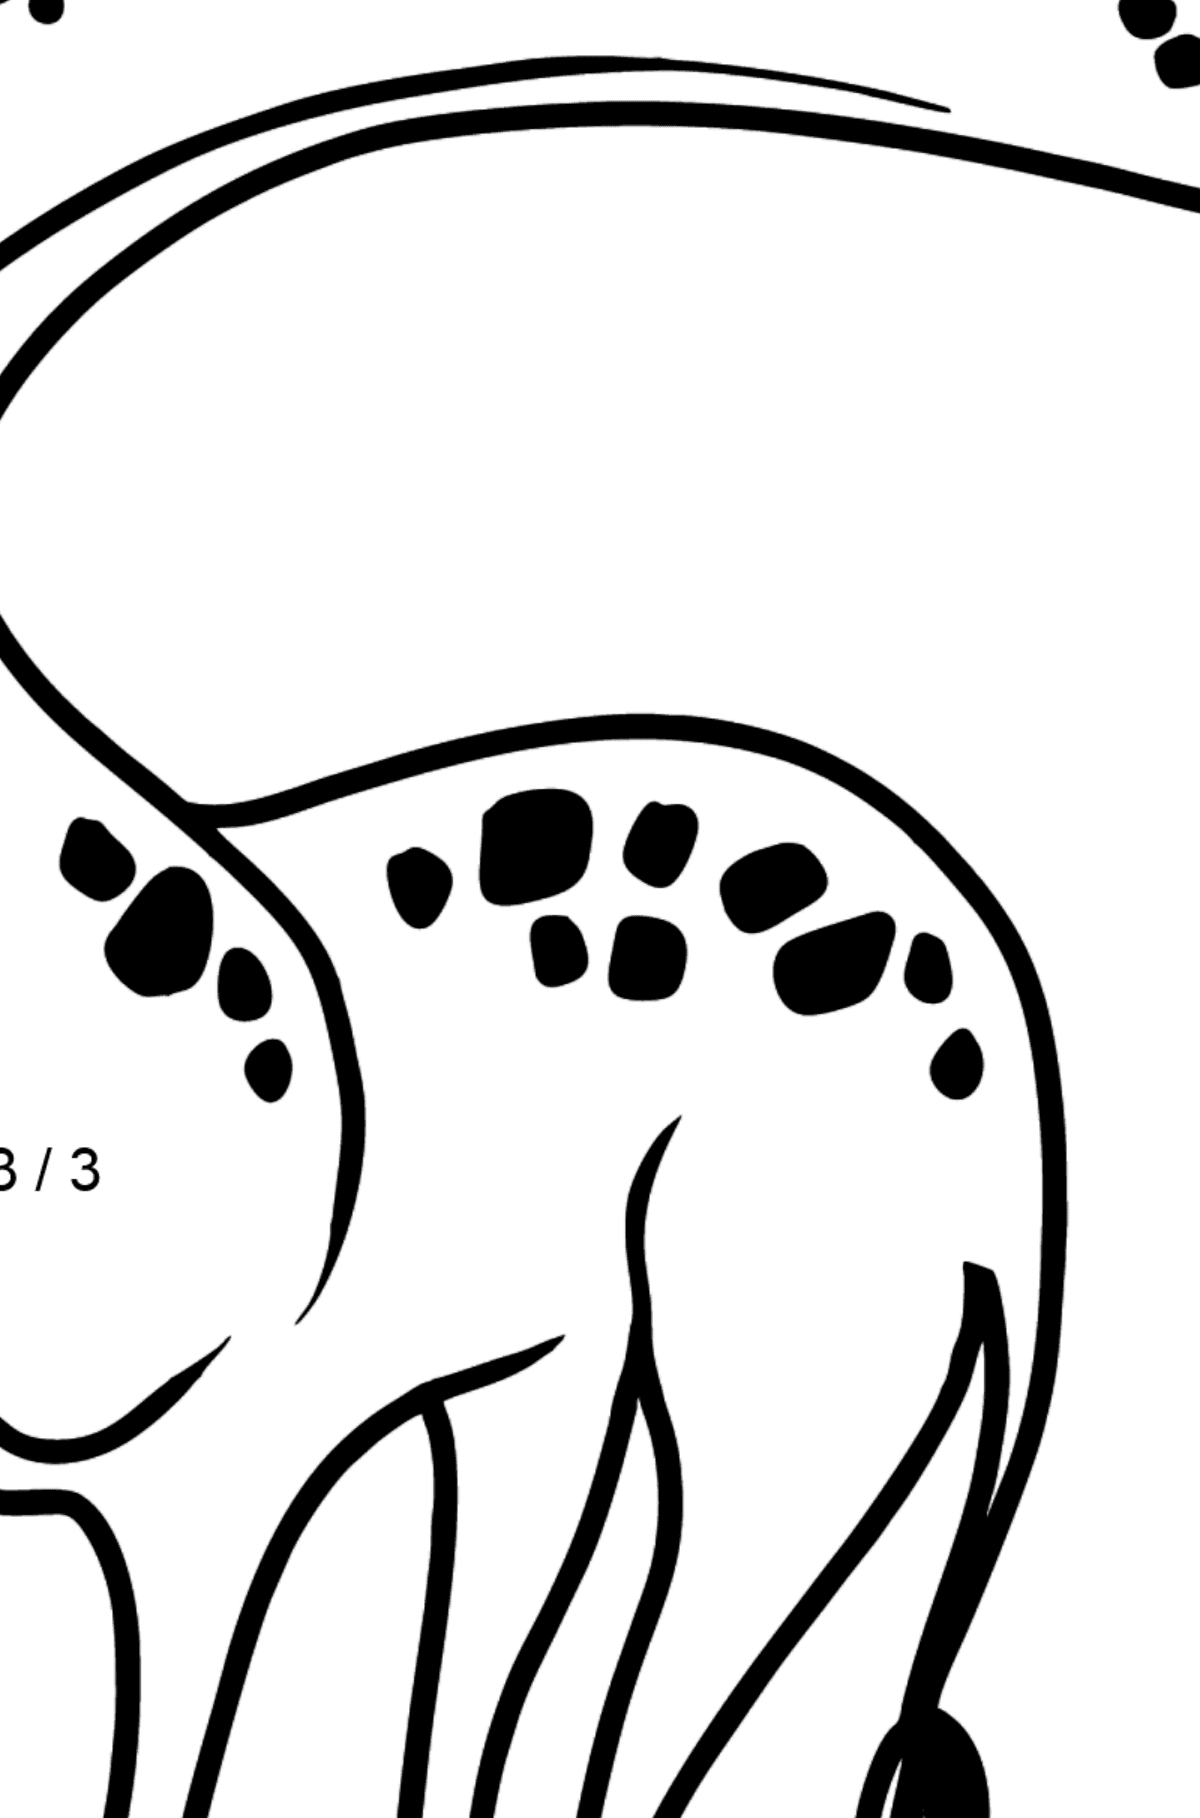 Giraffe coloring page - Math Coloring - Division for Kids